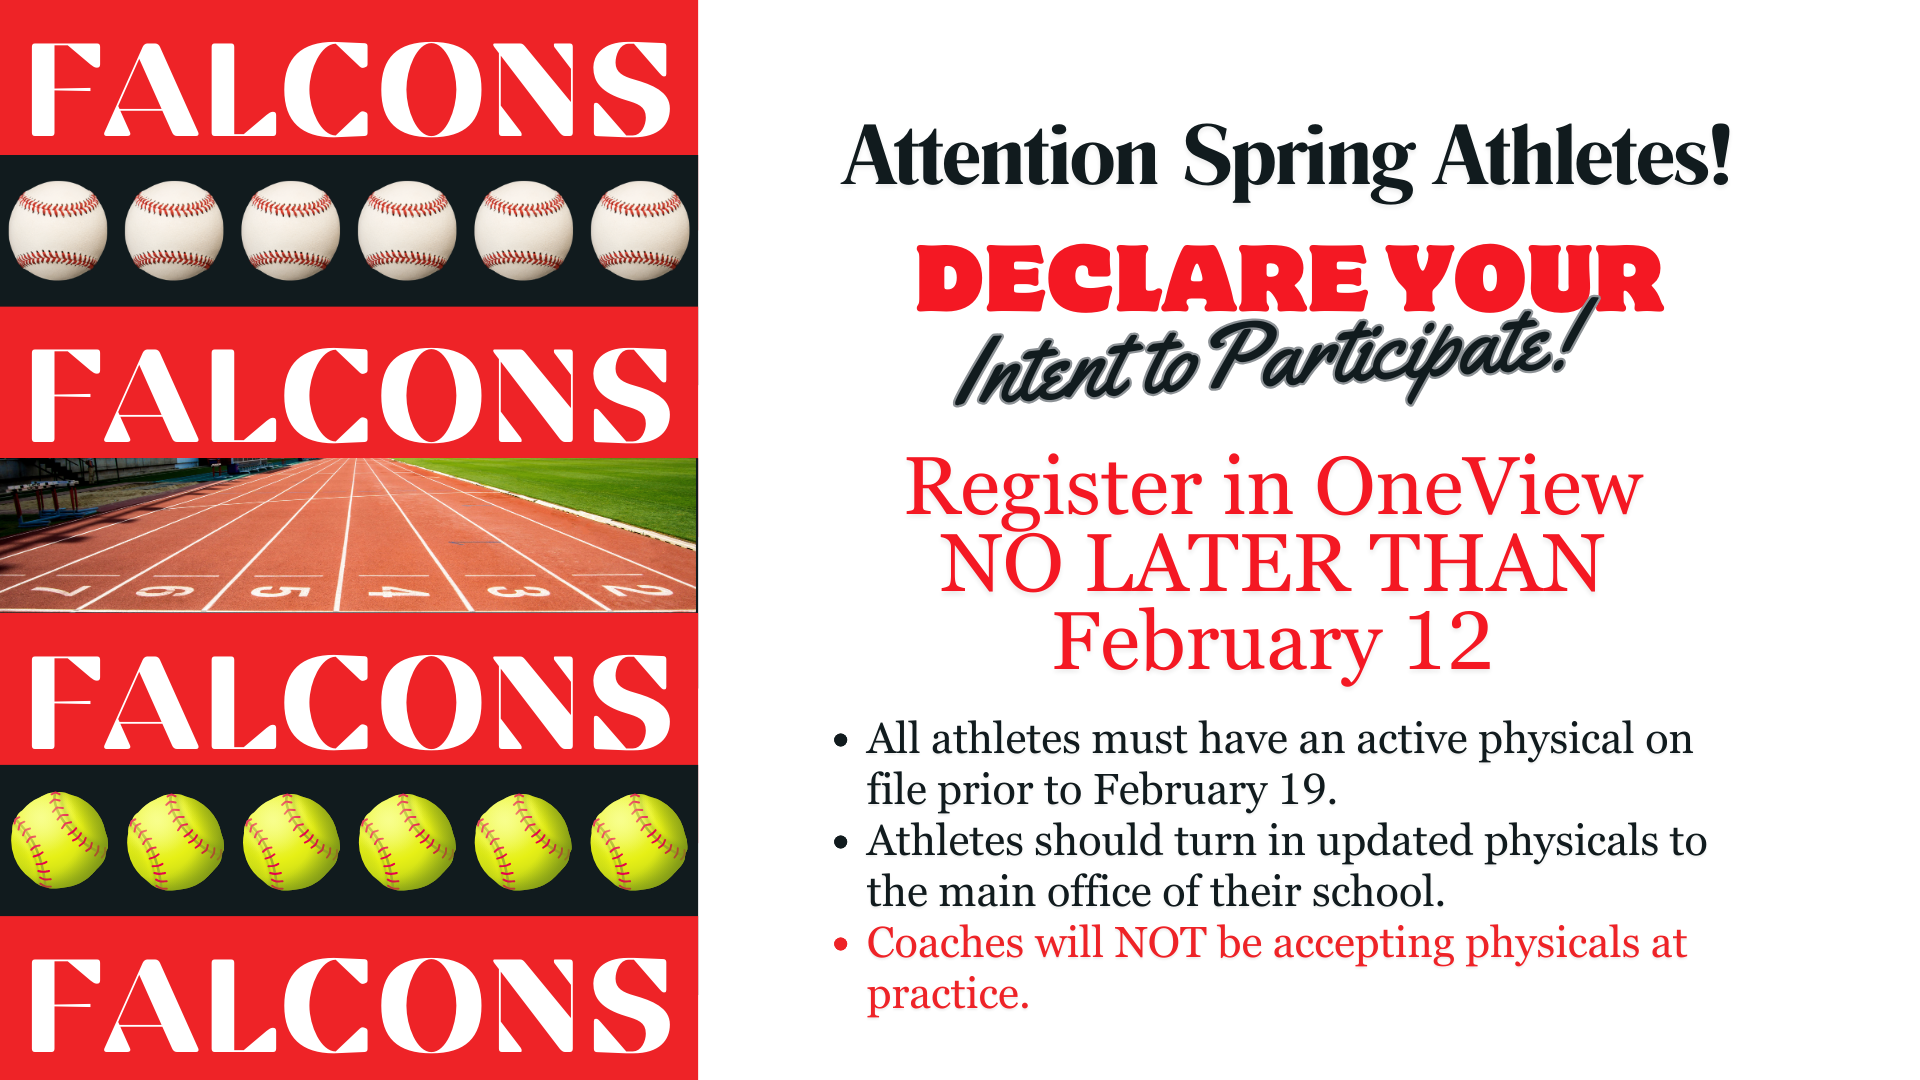 Declare your intent to participate in spring sports by February 12